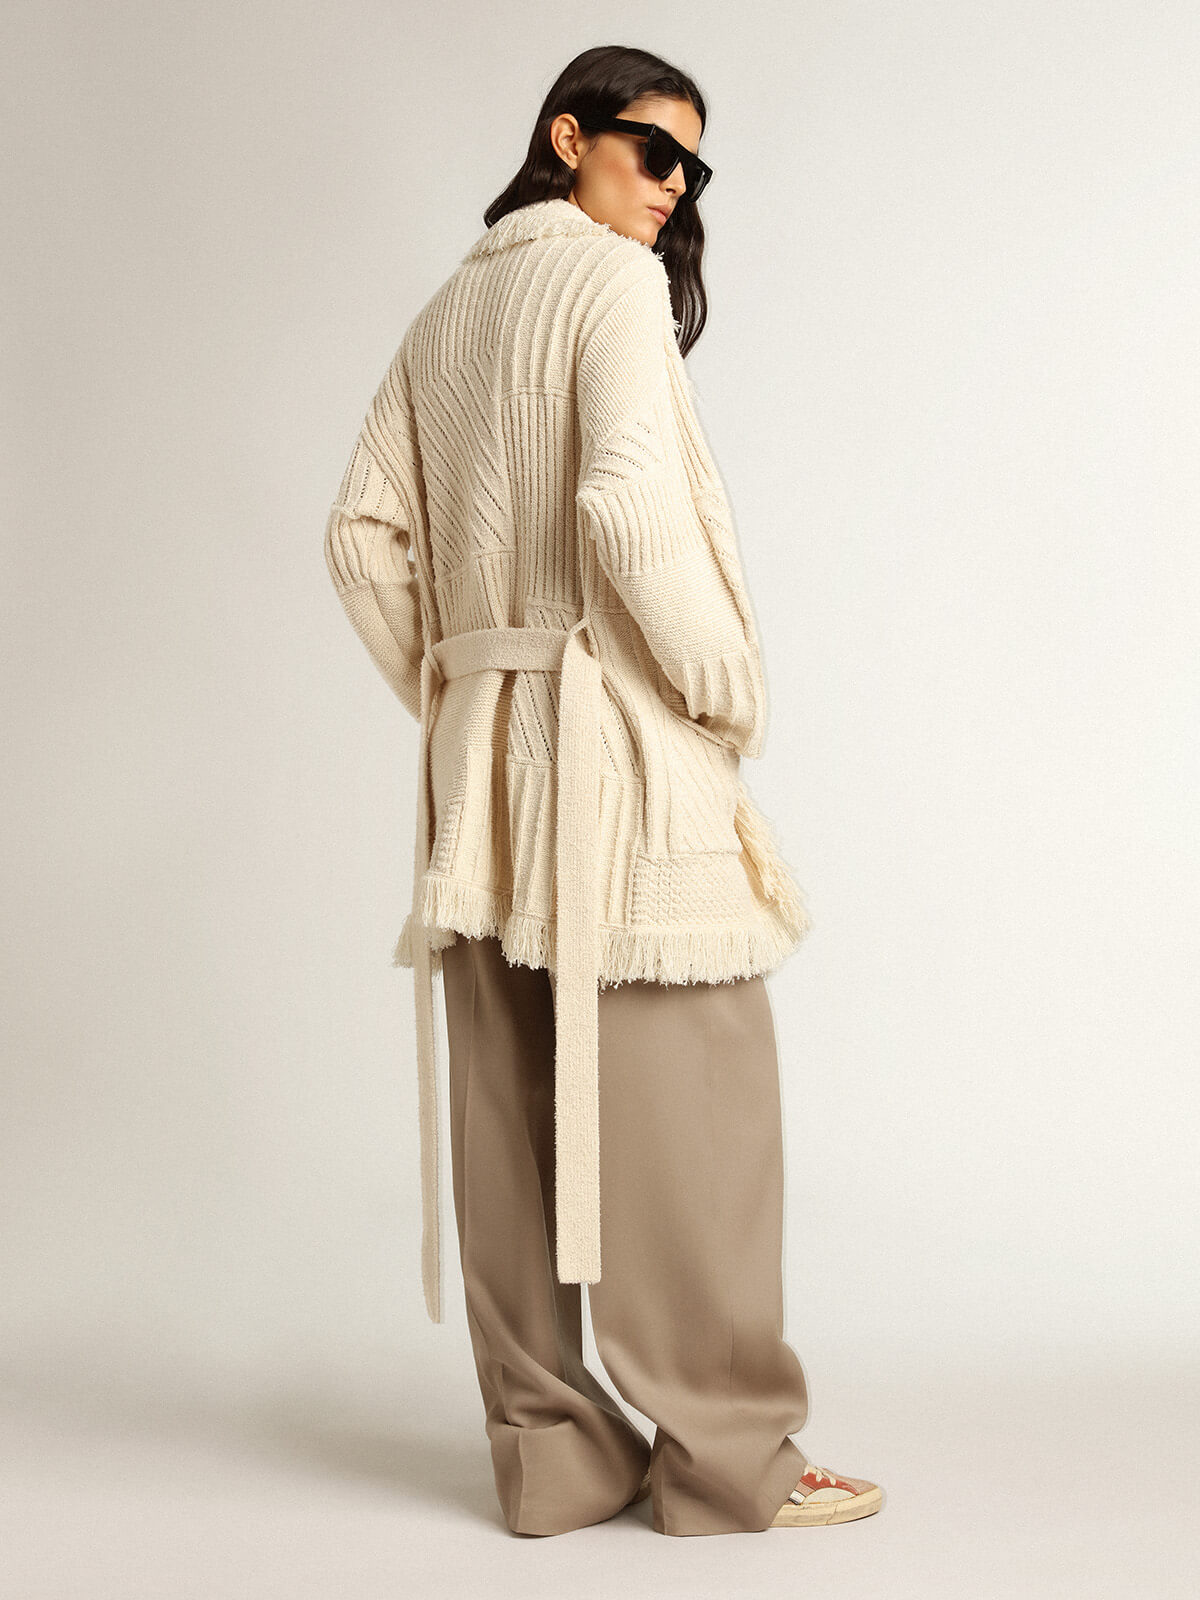 Golden Goose Journey Ws Knit Belted Cardigan in Papyrus available at TNT The New Trend Australia.